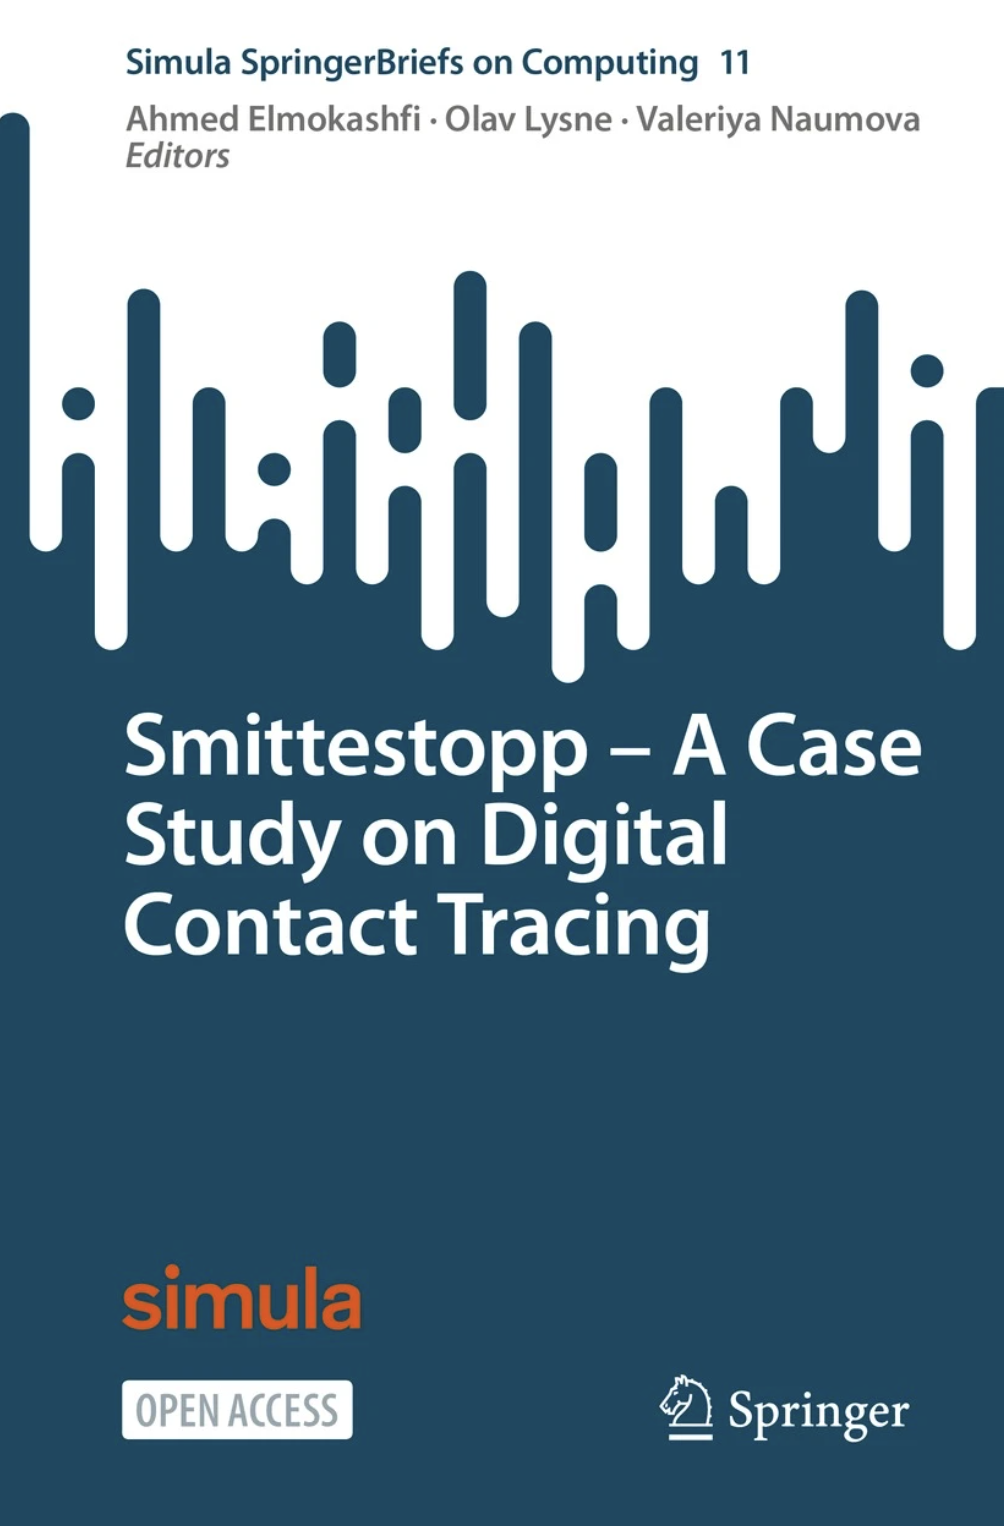 New book in the SpringerBriefs series: Smittestopp − A Case Study on Digital Contact Tracing